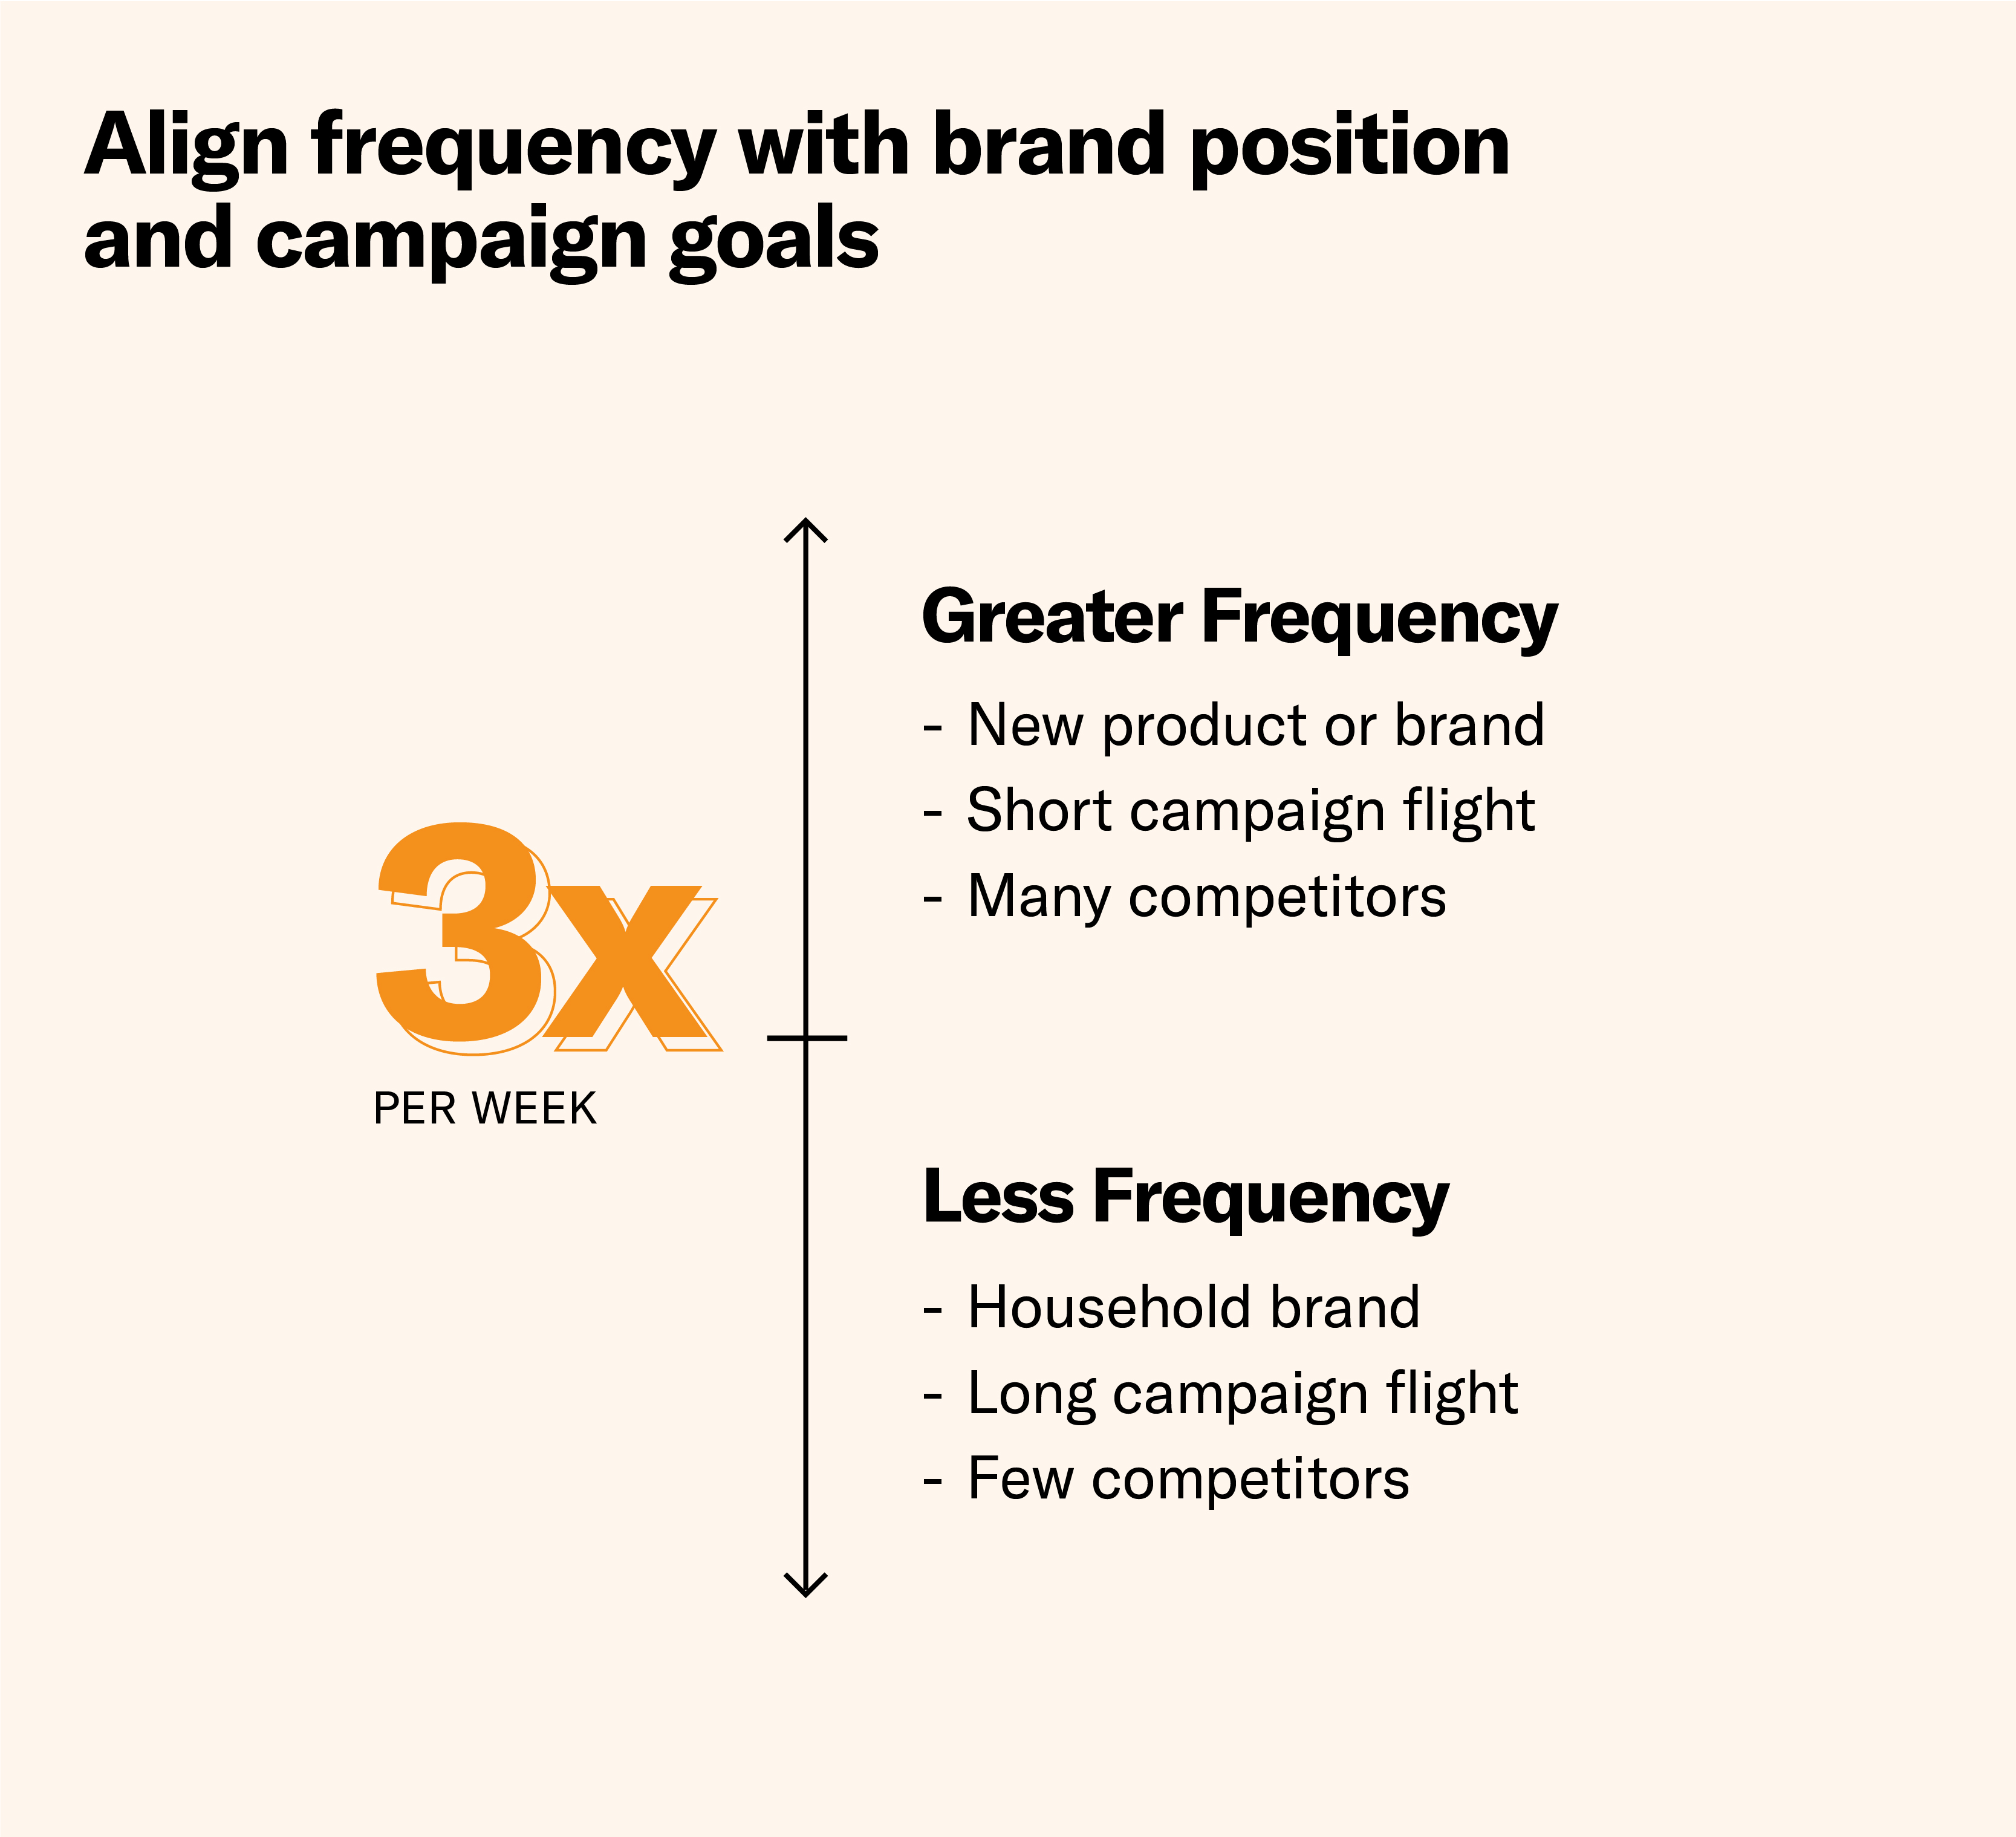 Align Frequency with Brand Position and Campaign Goals